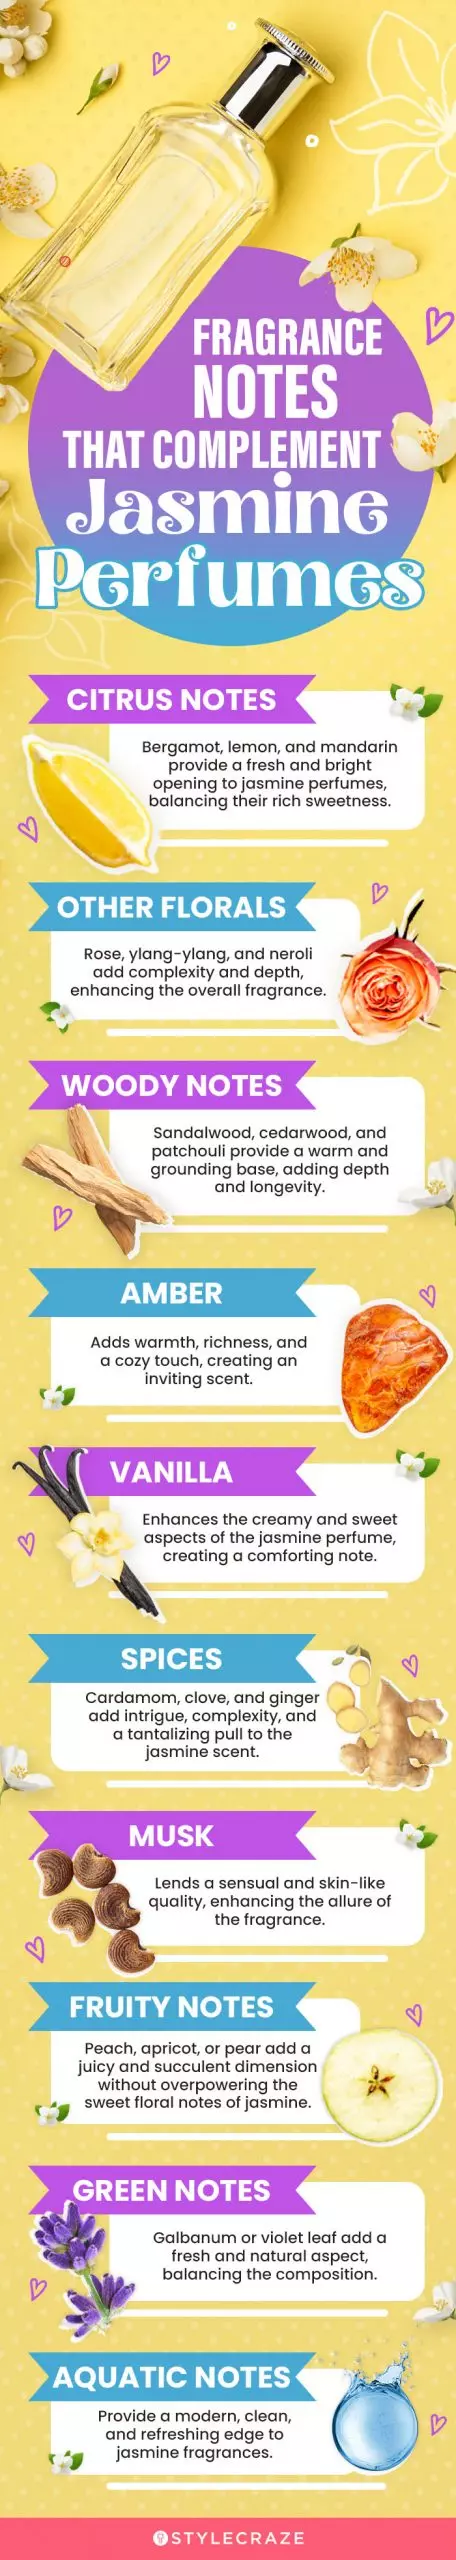 Fragrance Notes That Complement Jasmine Perfumes (infographic)